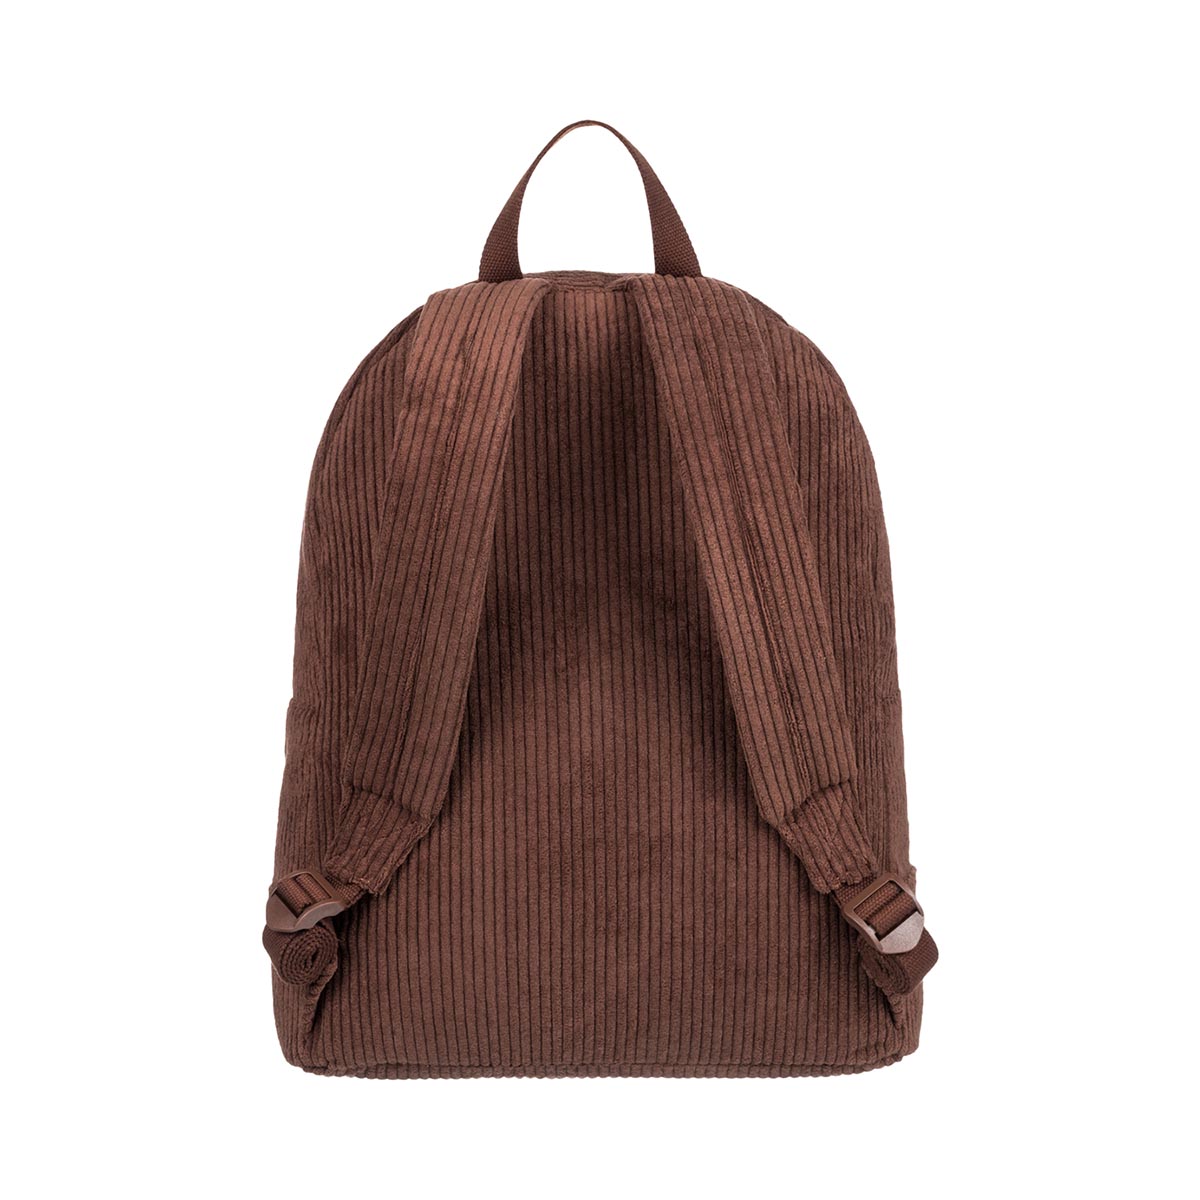 ROXY - COZY NATURE BACKPACK